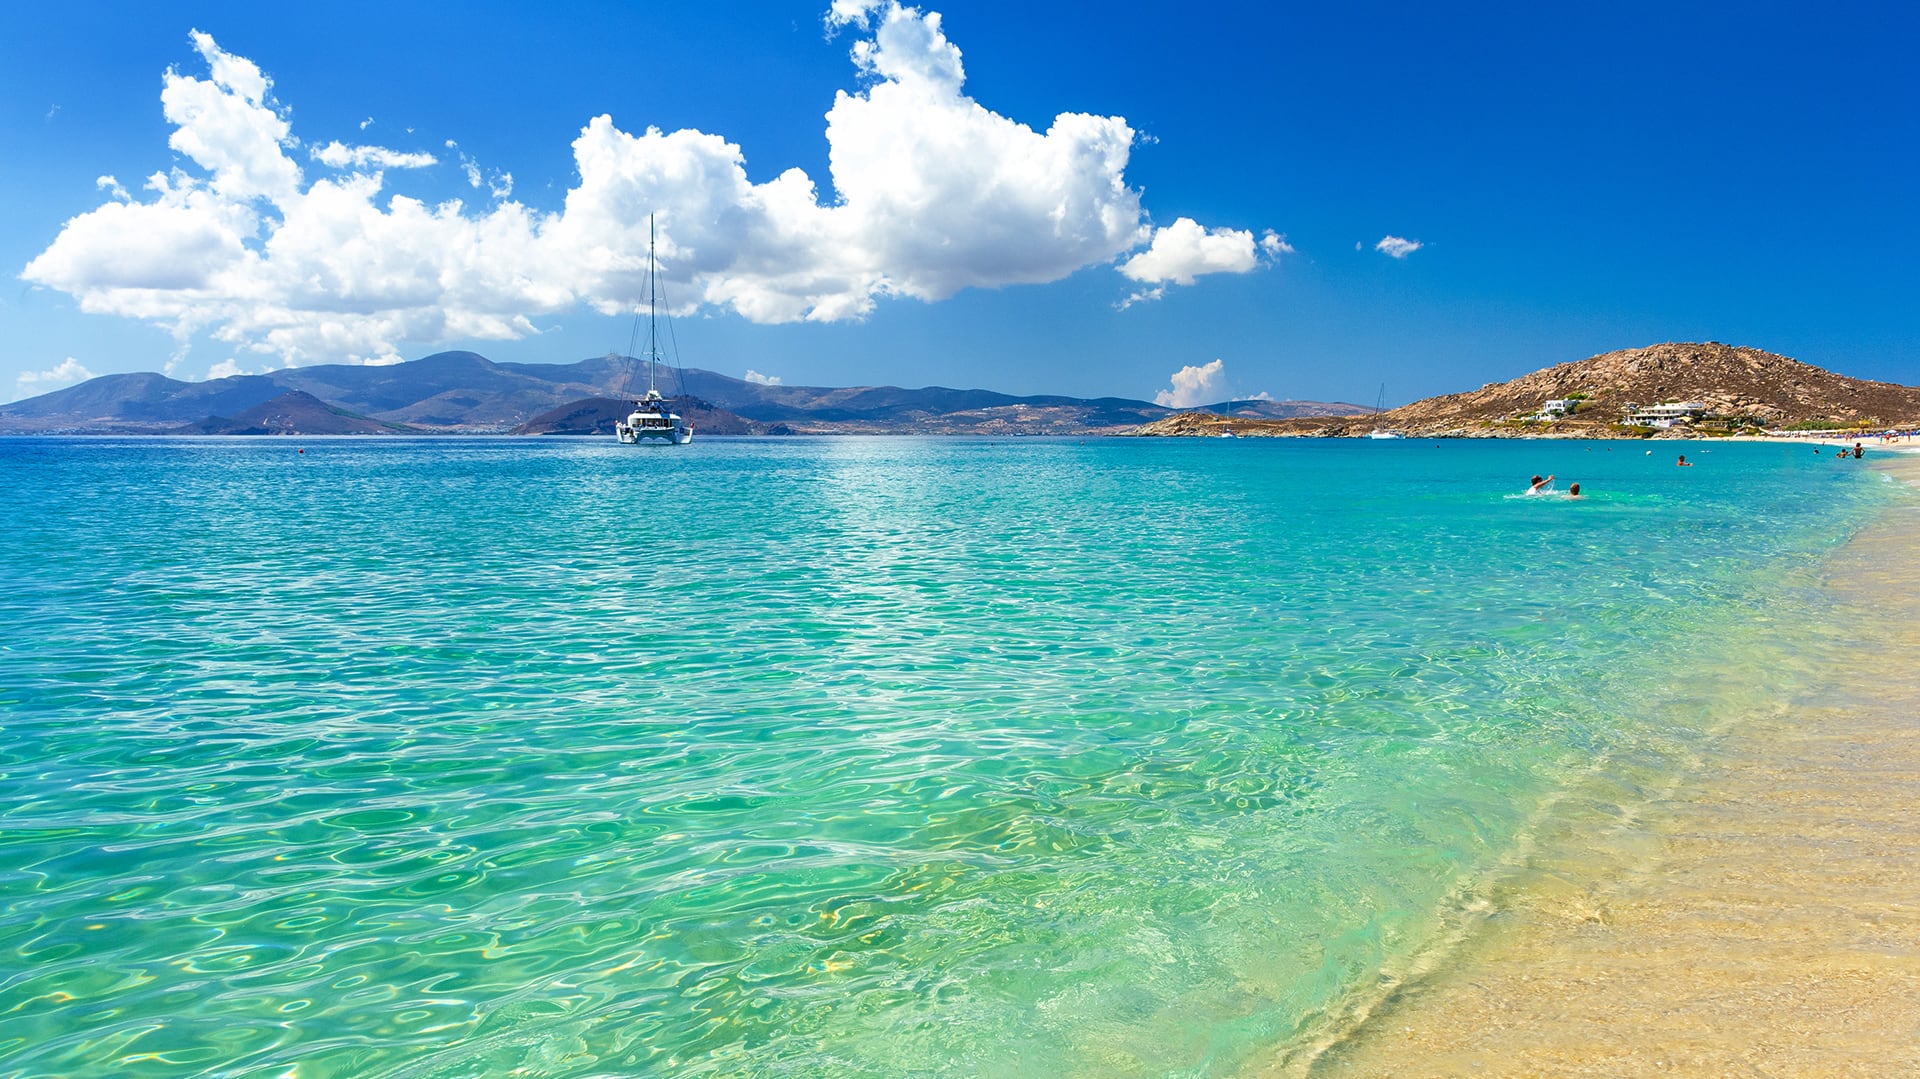             GET ON BOARD!                     a short break cruise to enjoy more of Cyclades        